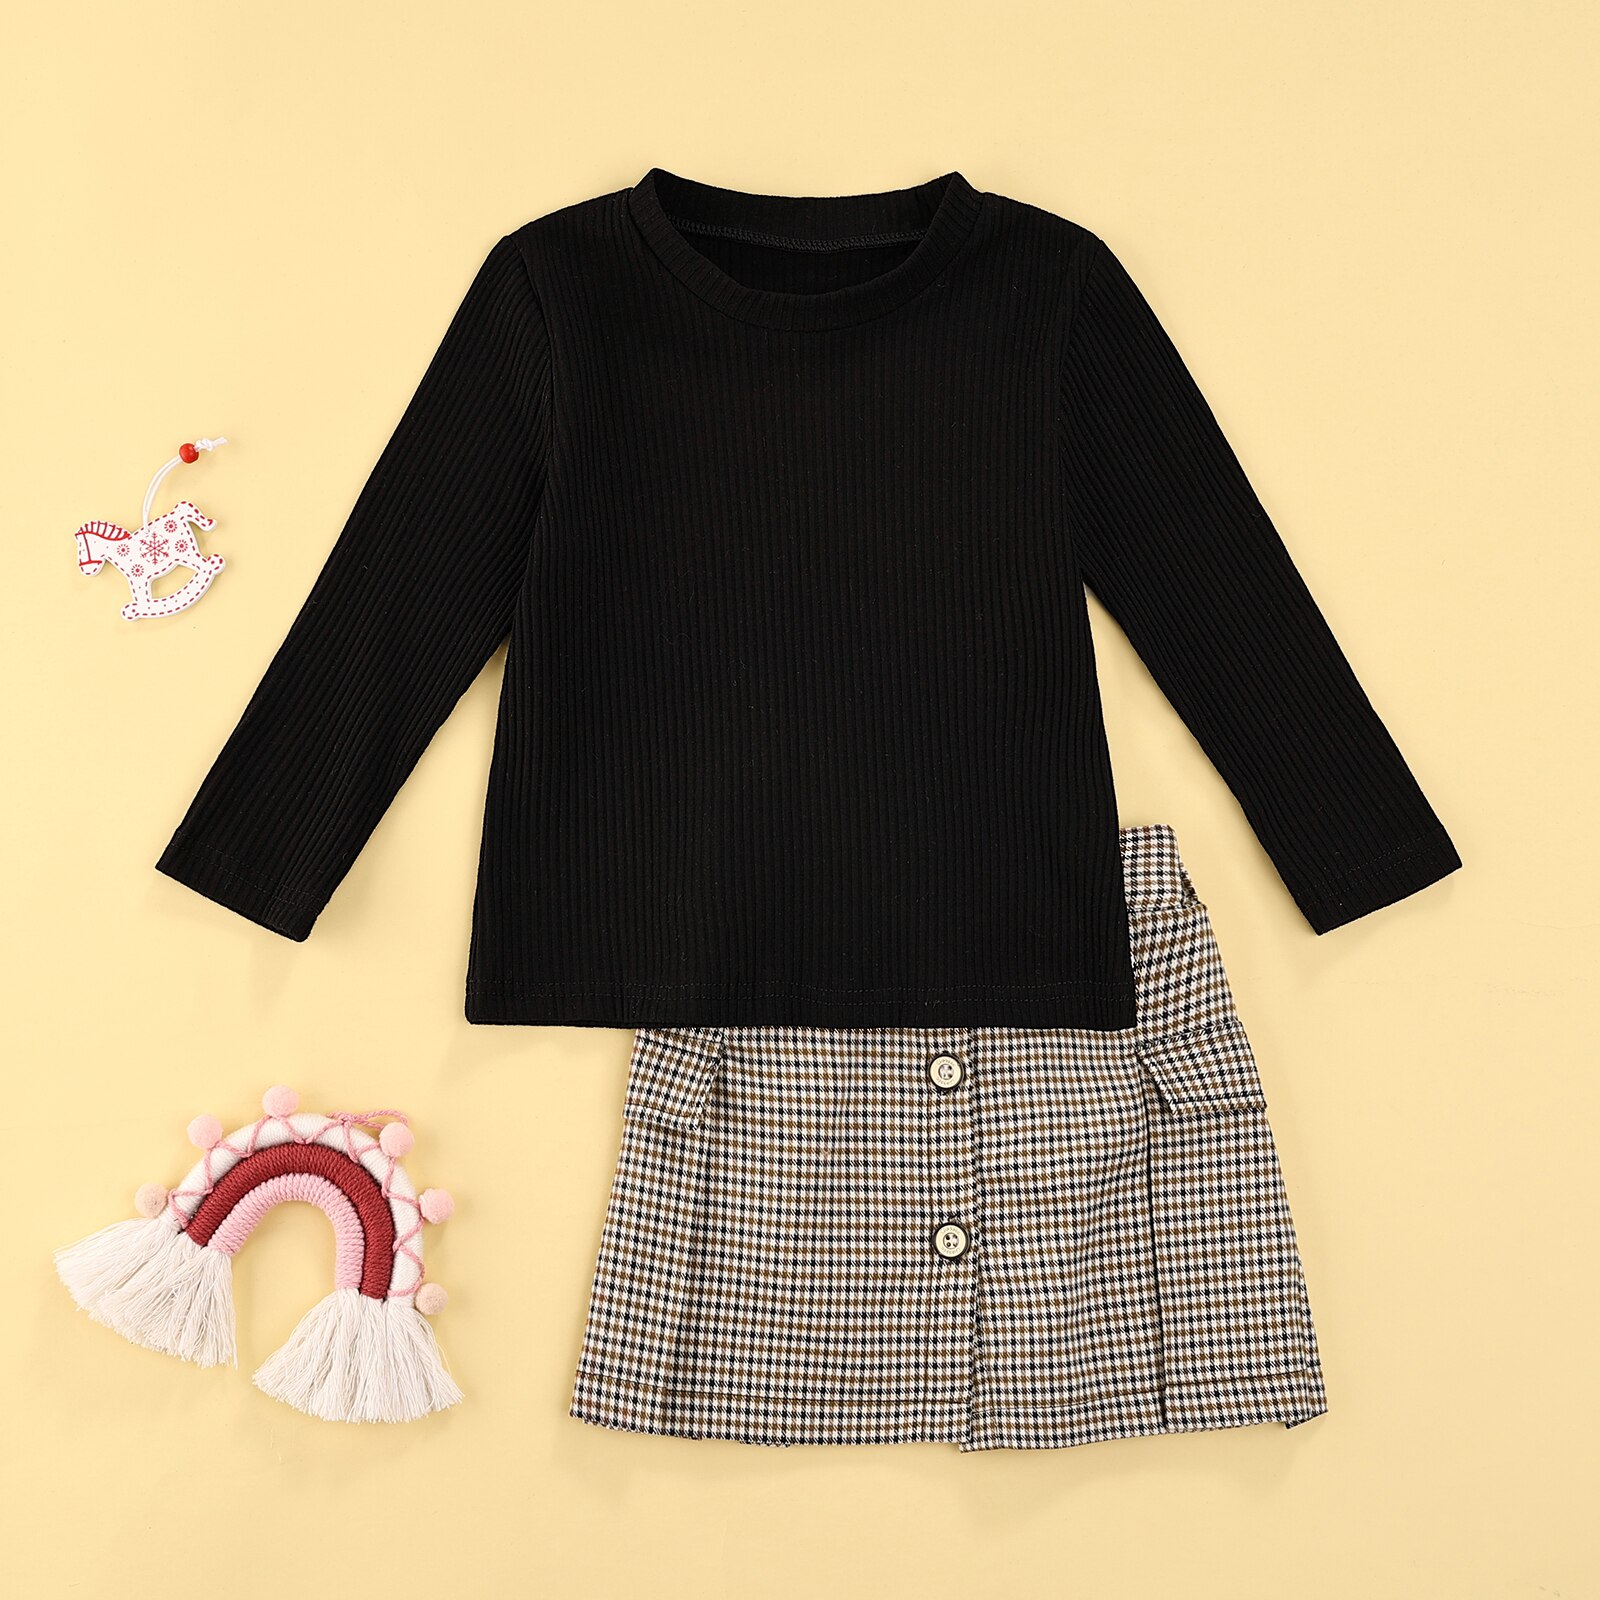 Citgeett-Autumn-Fashion-Kids-Girls-Clothes-Sets-Knit-Long-Sleeve-Solid-Sweater-Tops-Plaid-A-Line-3